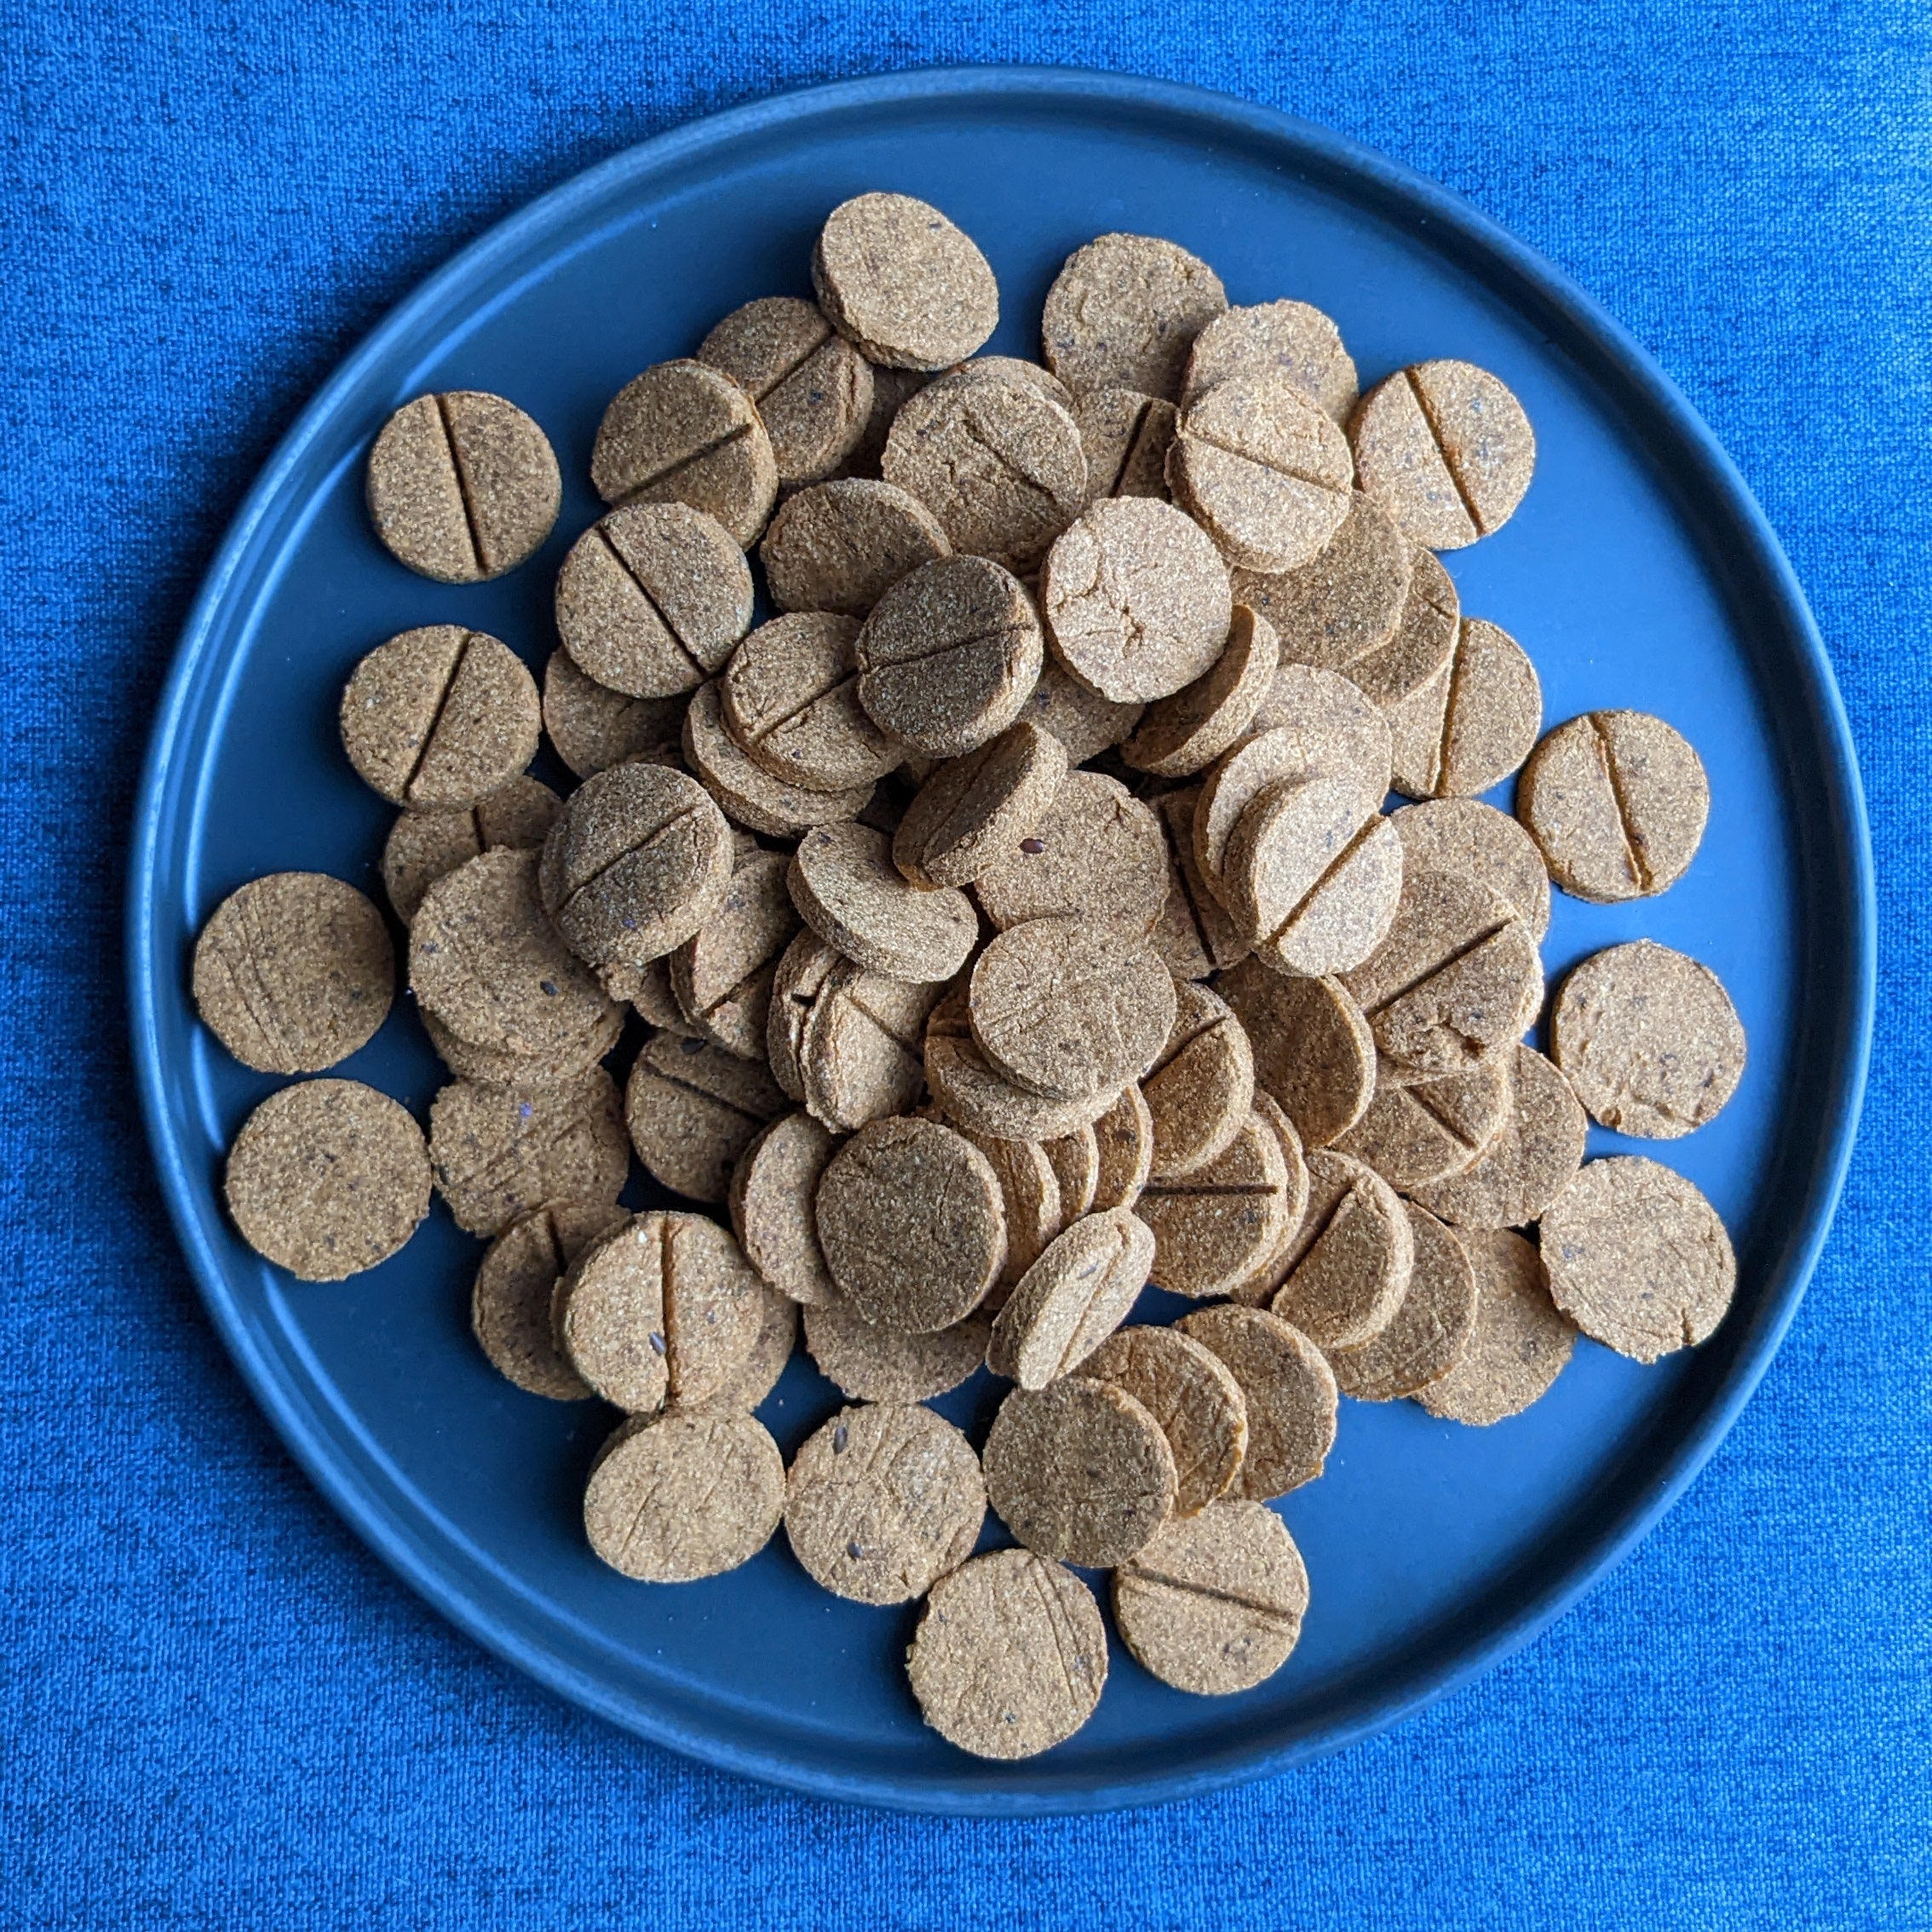 CHESTER'S PEANUT BUTTER AND GINGER DOG TREATS FOR CIRCULATORY SUPPORT